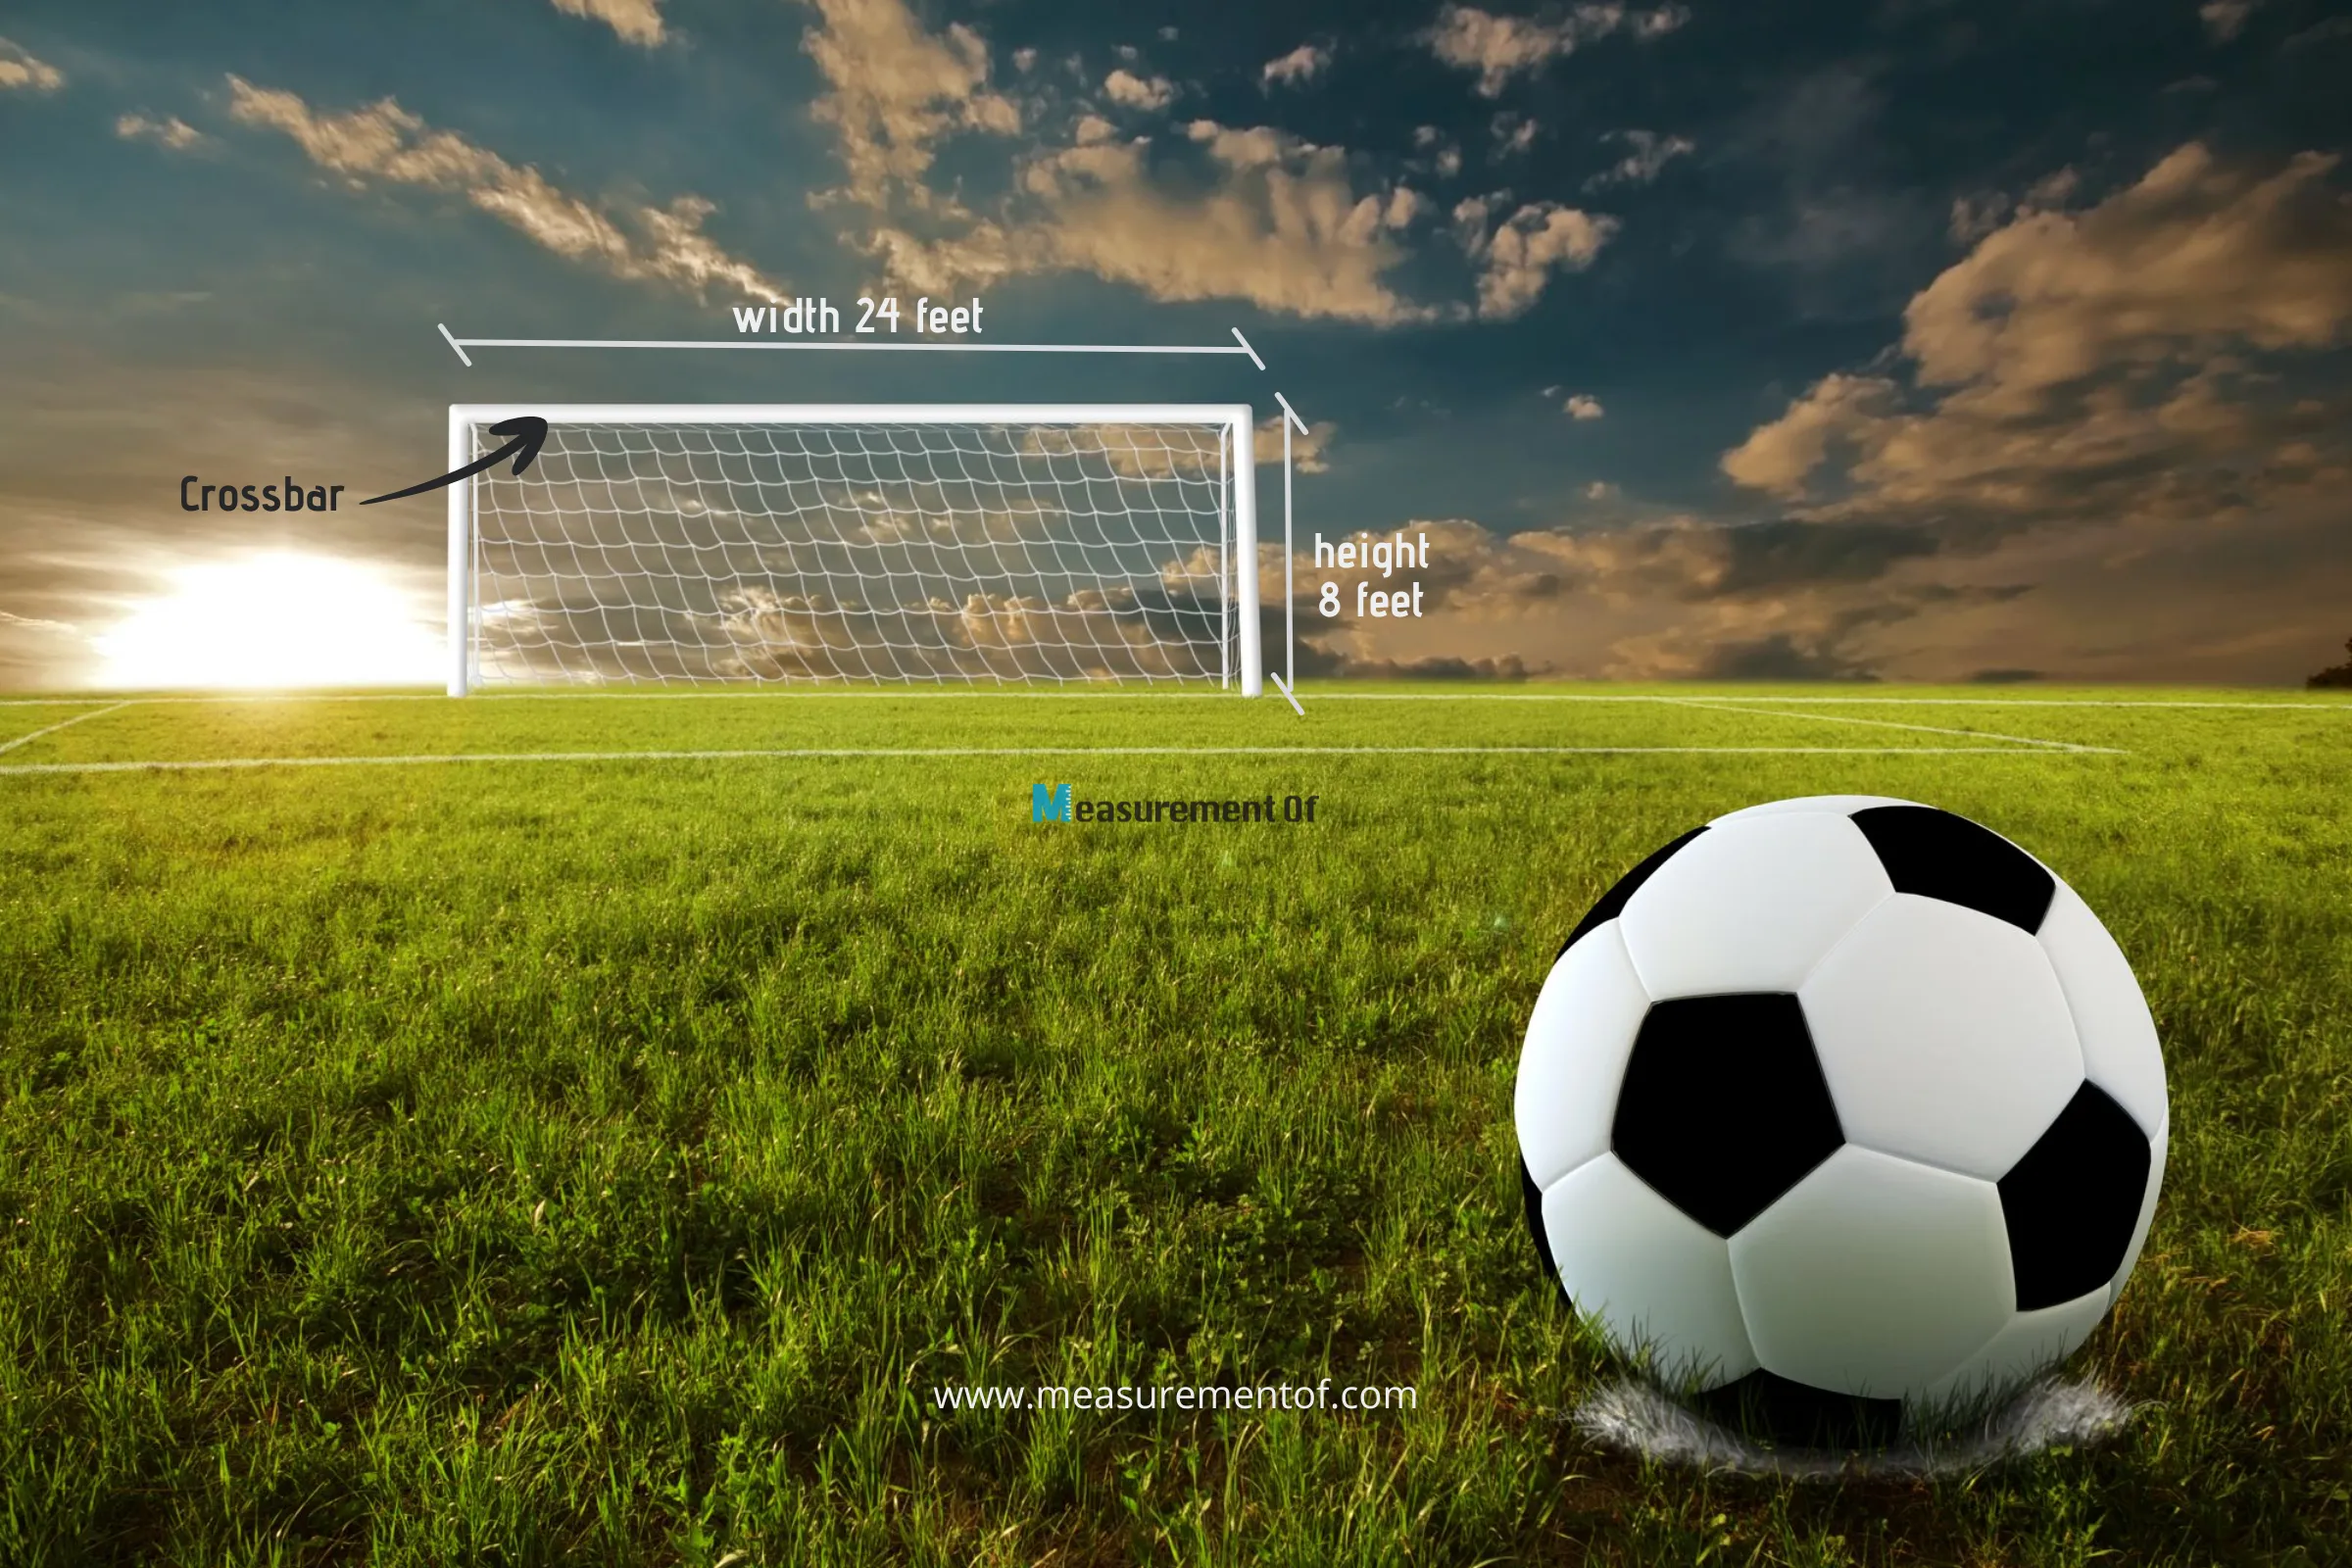 What Are The Dimensions of a Soccer Field?